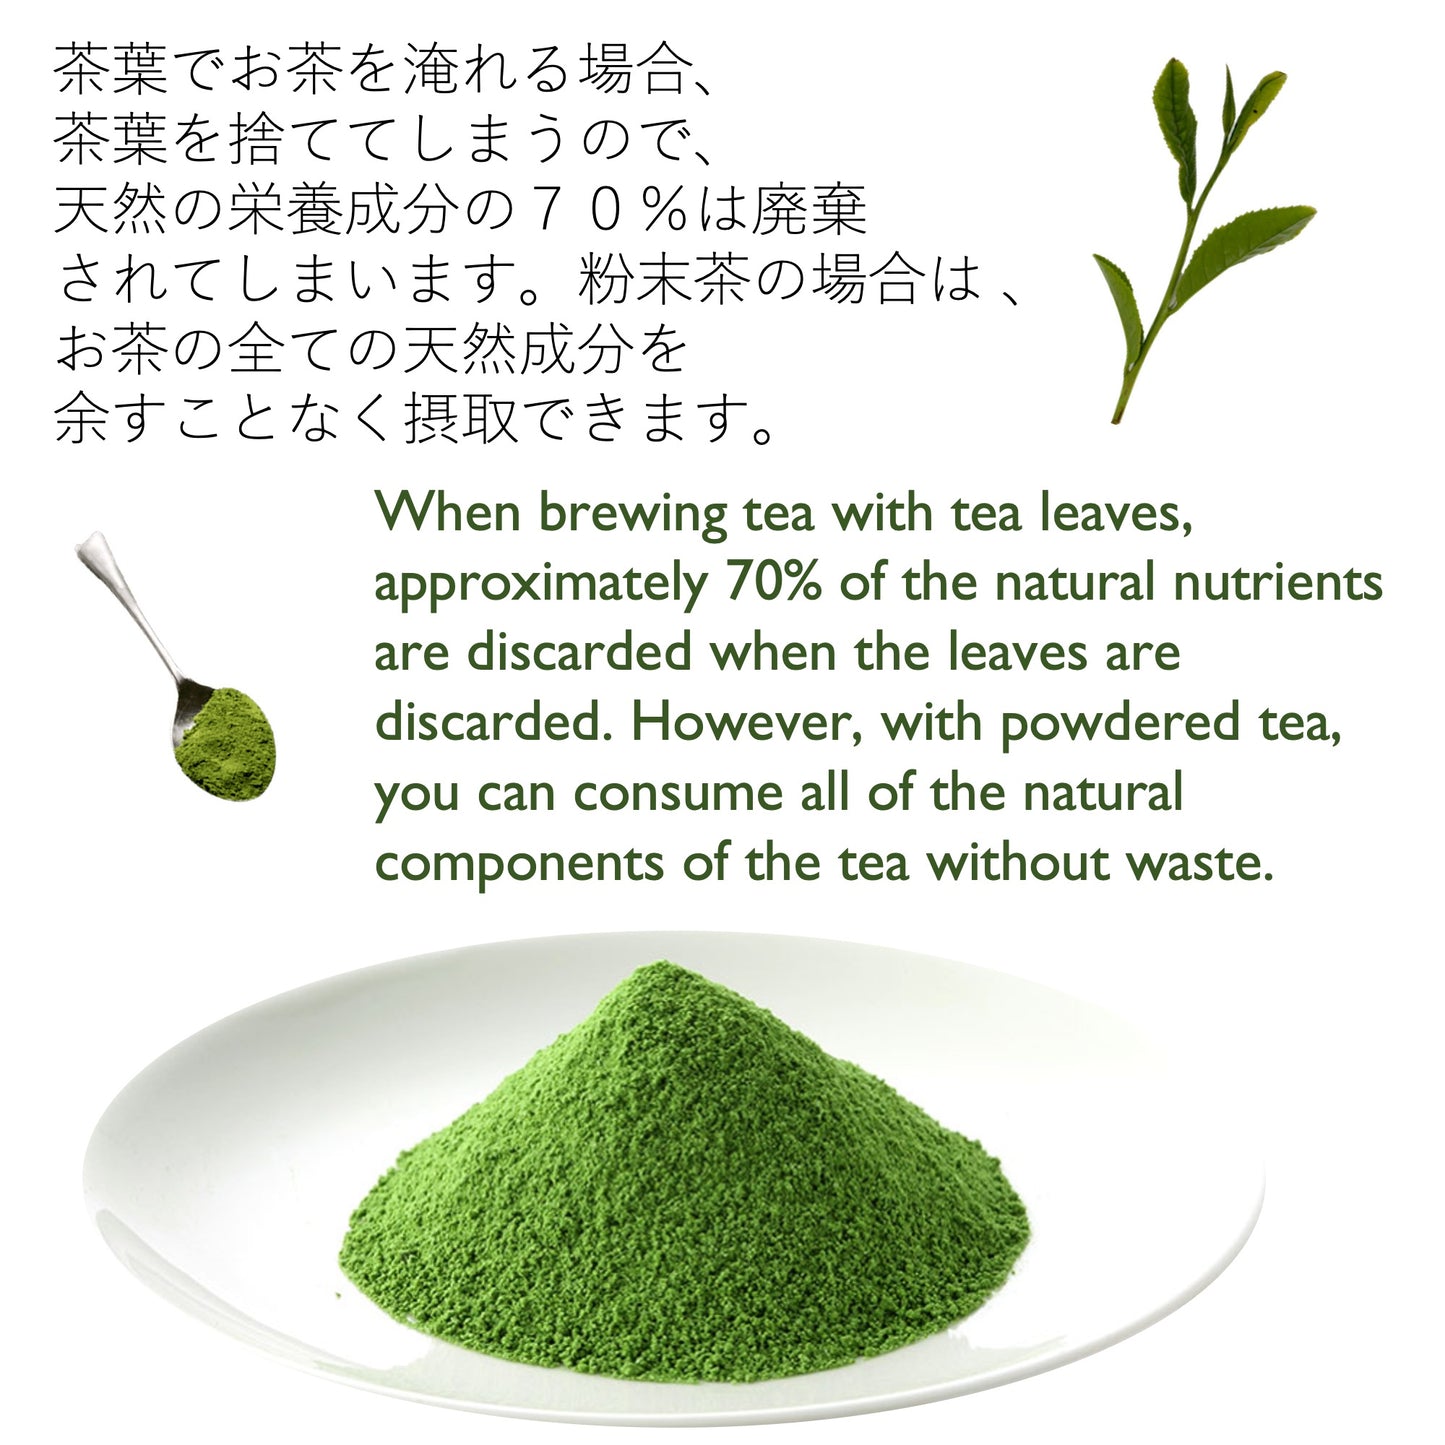 [Dreaming Matcha : Matcha in Love (Individual packets)] Authentic Yame Matcha Powder made in Japan for drink baking latte convenient single serve packets [恋する抹茶（個包装）] 抹茶 無添加 無糖 無塩 無香料 100% 向抹茶（むこうまっちゃ）Mukoh Matcha